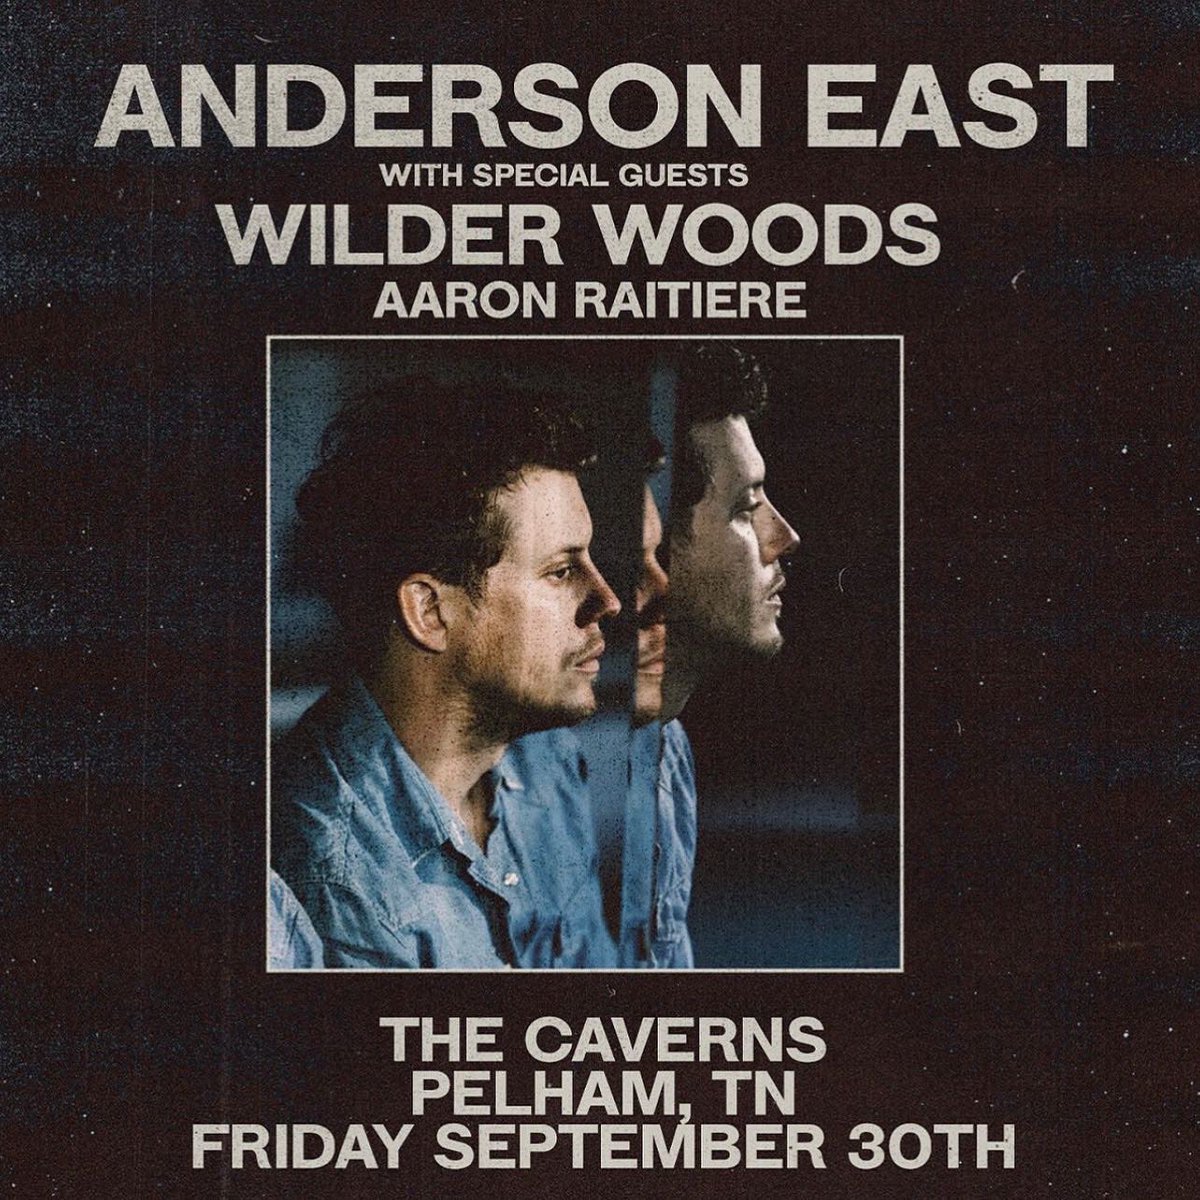 Here we go again…. Proud to be back out with @Andersoneast for a few shows, and lookin forward to takin it underground with him an @iamwilderwoods